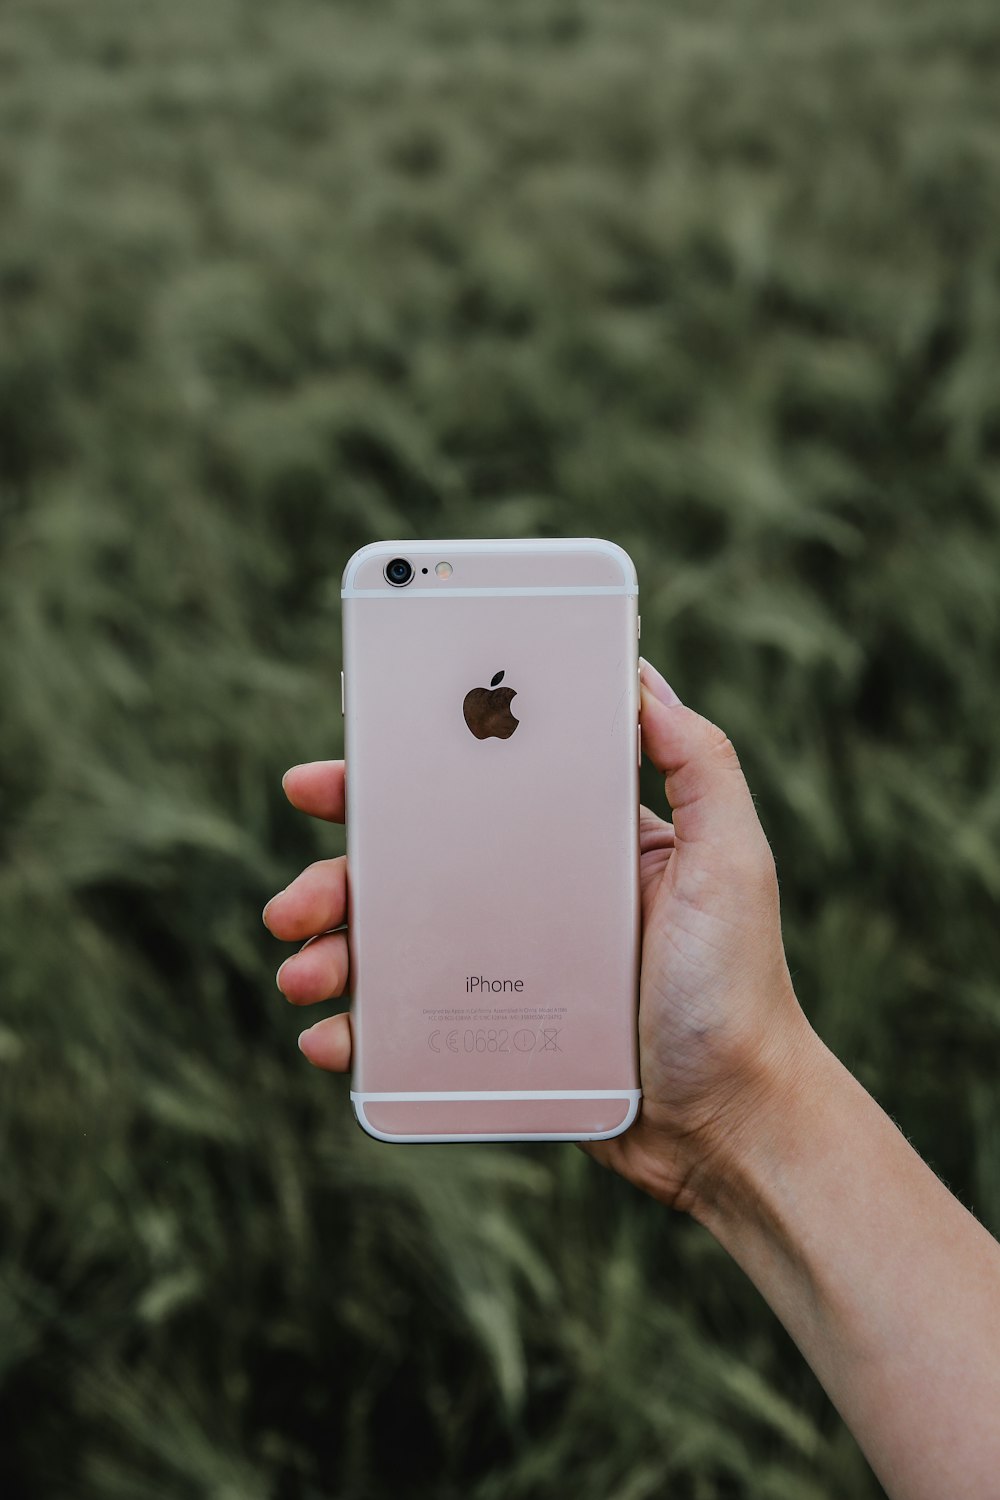 Iphone 6s Plus Pictures Download Free Images On Unsplash